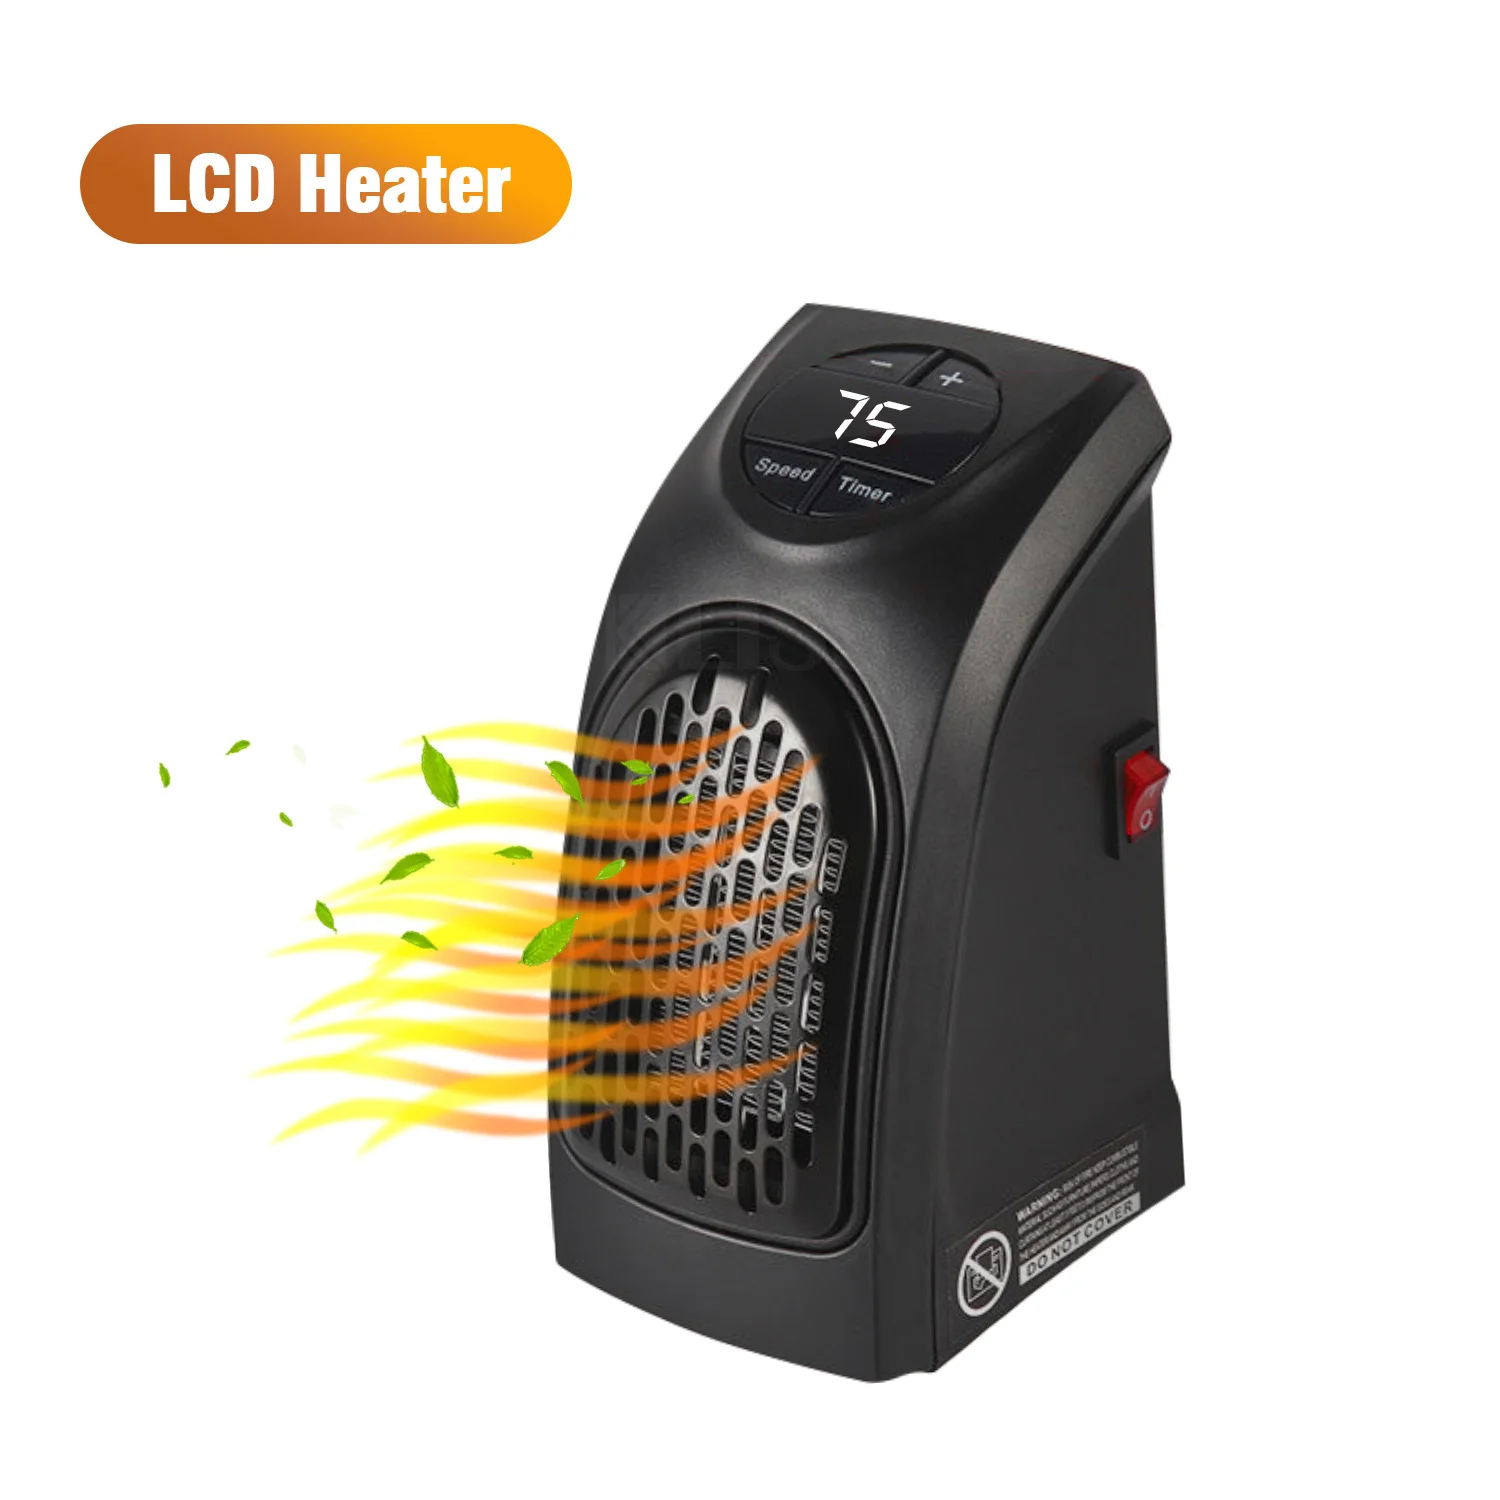 Best Selling Lcd Heater Electric Portable Fan Heater At Office Use Electric  Fan Heater For Home Heating - Buy Fan Heater,Electric Fan Heaters,Fan Heater  Portable Product on 